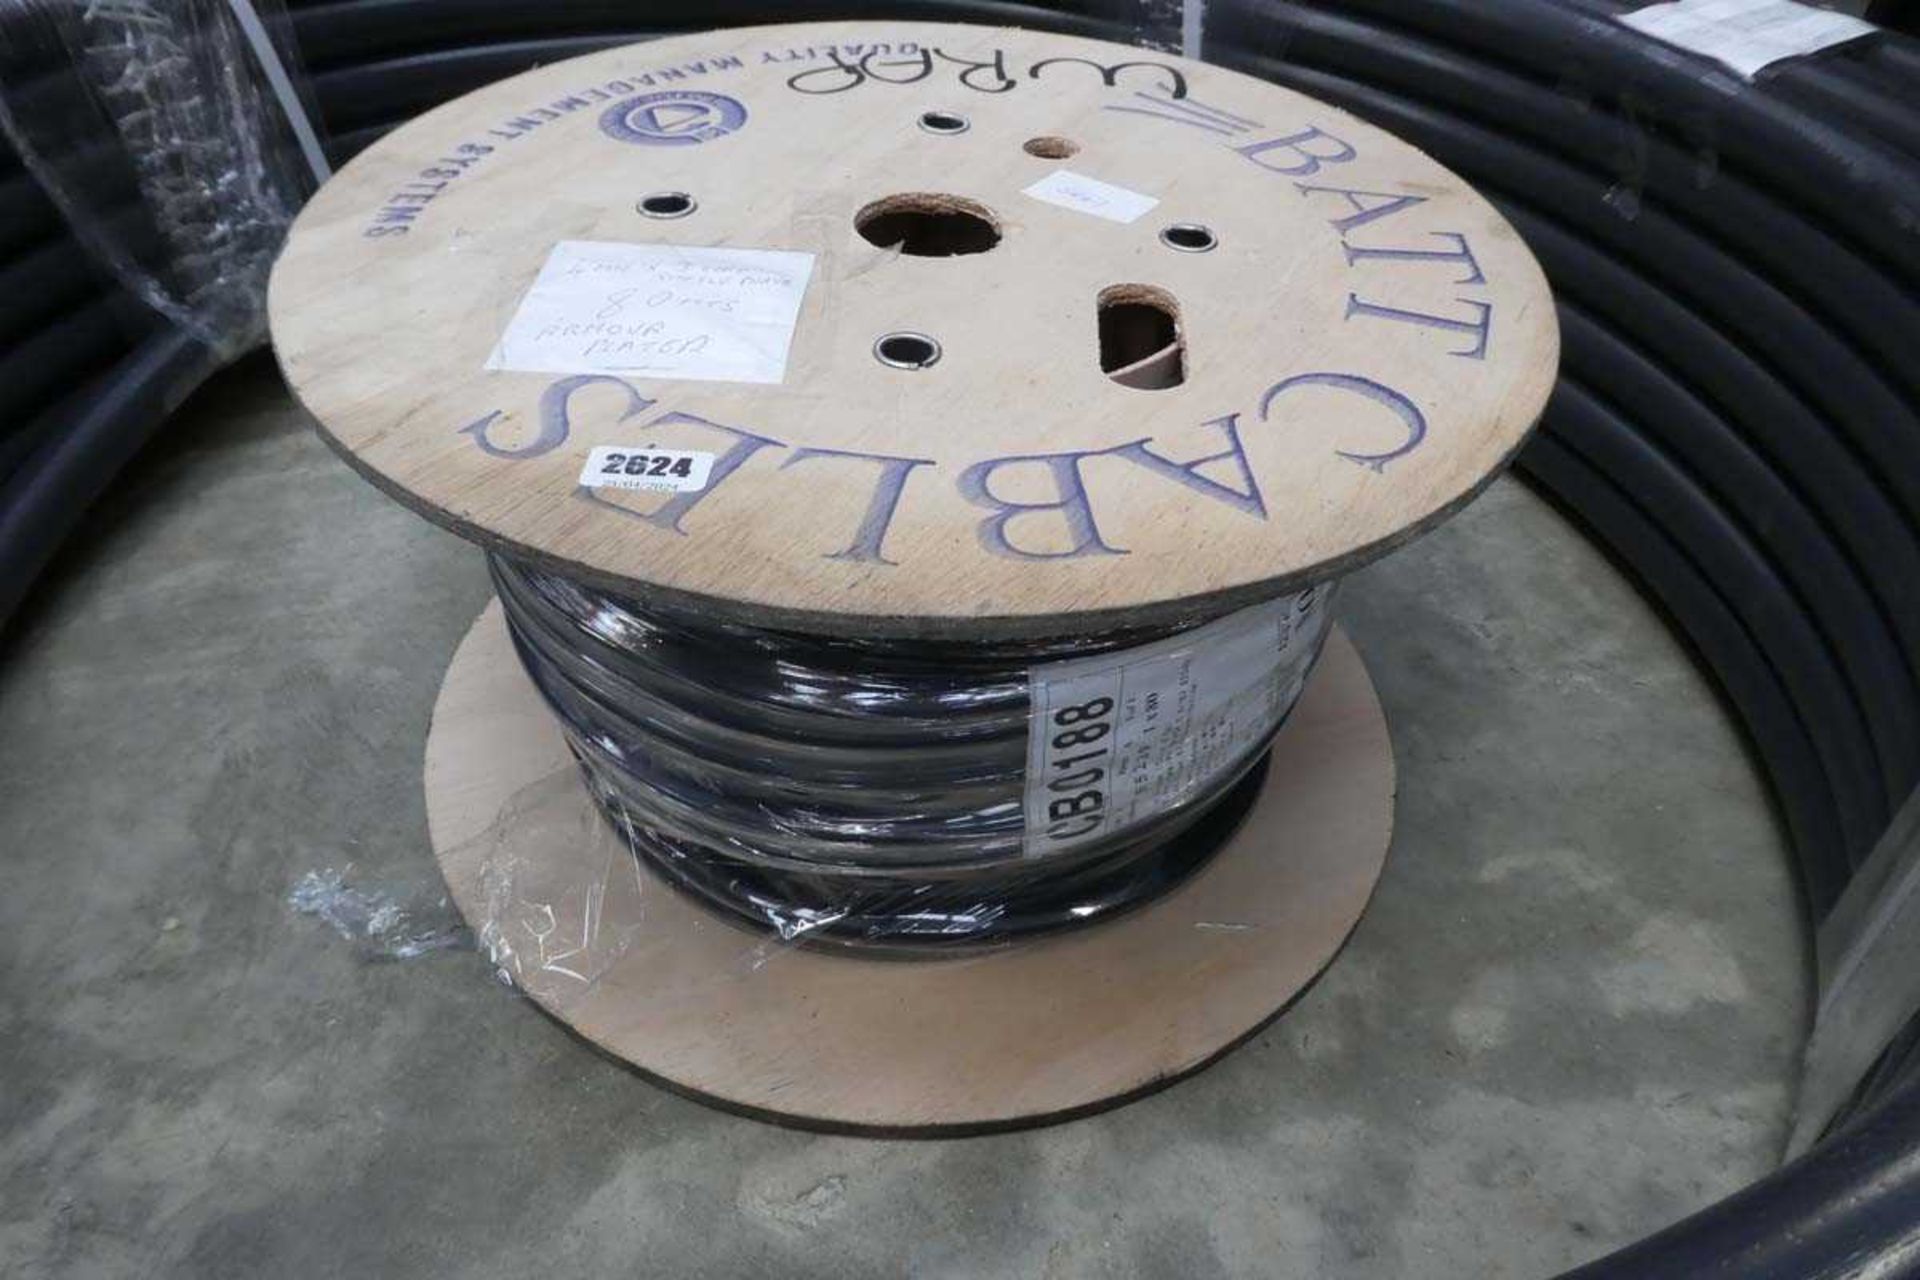 Reel containing approximately 80m. of 4mm x 3 core single phase cable